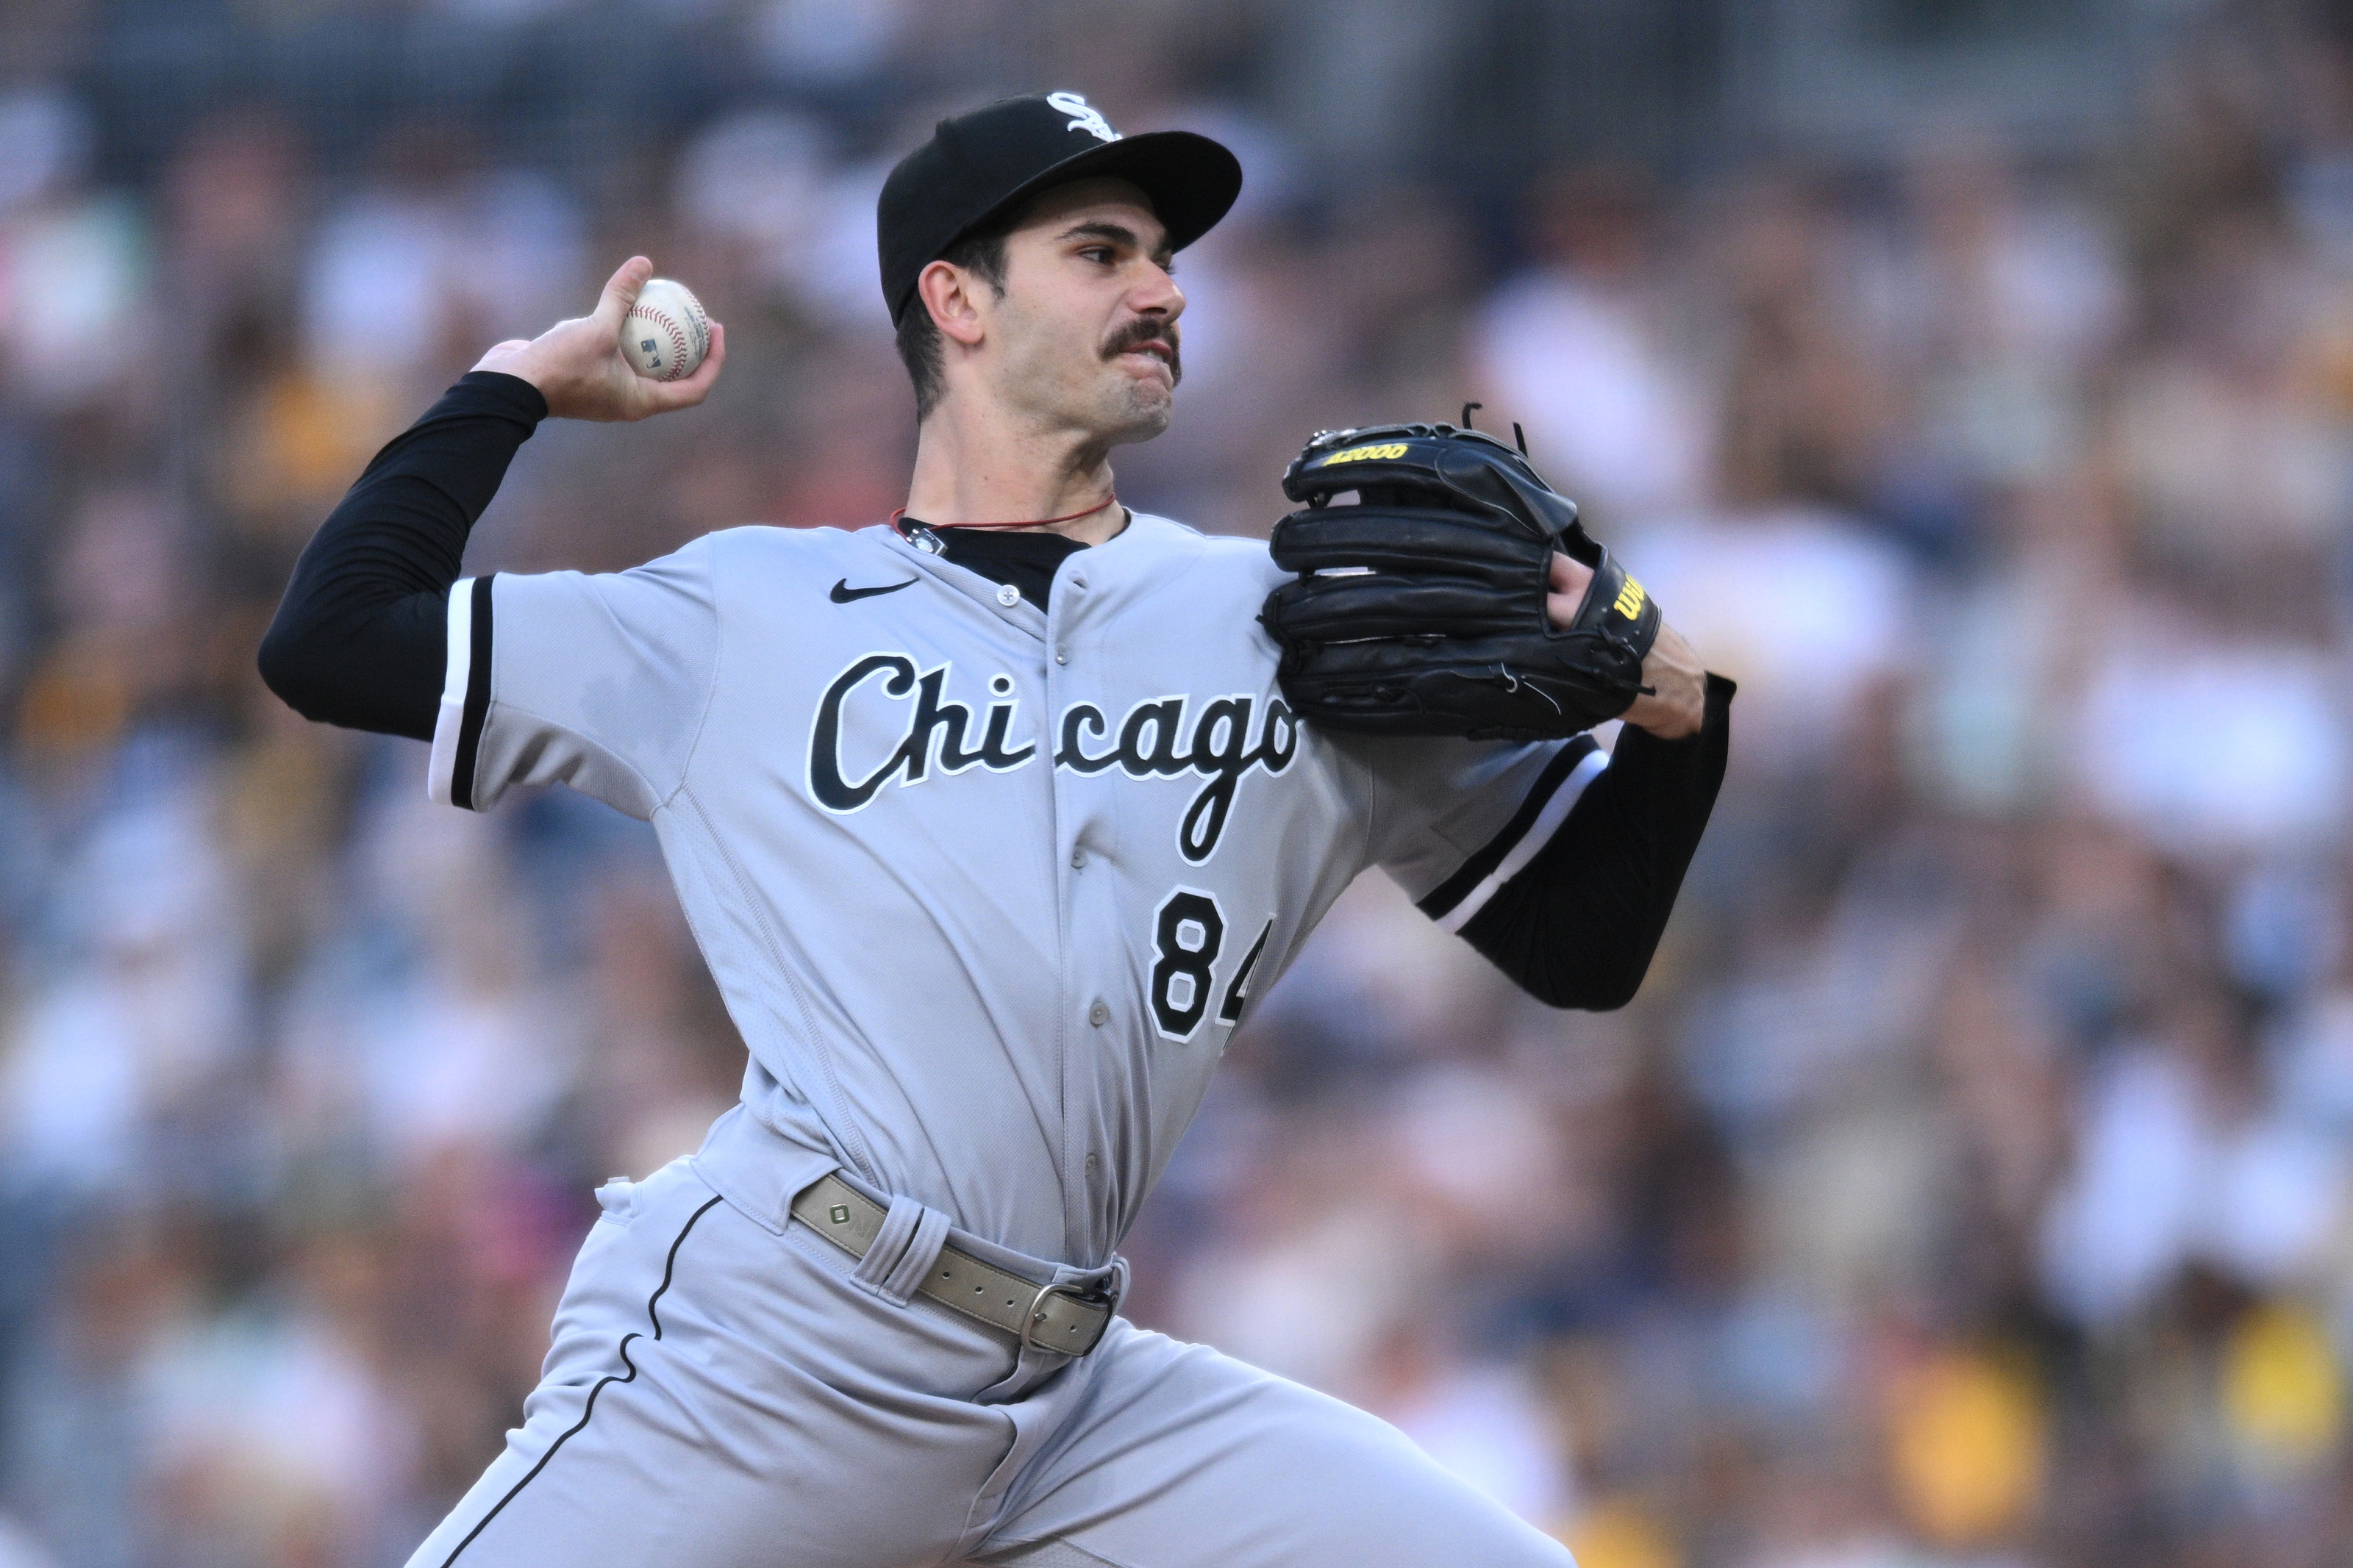 The Chicago White Sox starting rotation is questionable behind Dylan Cease